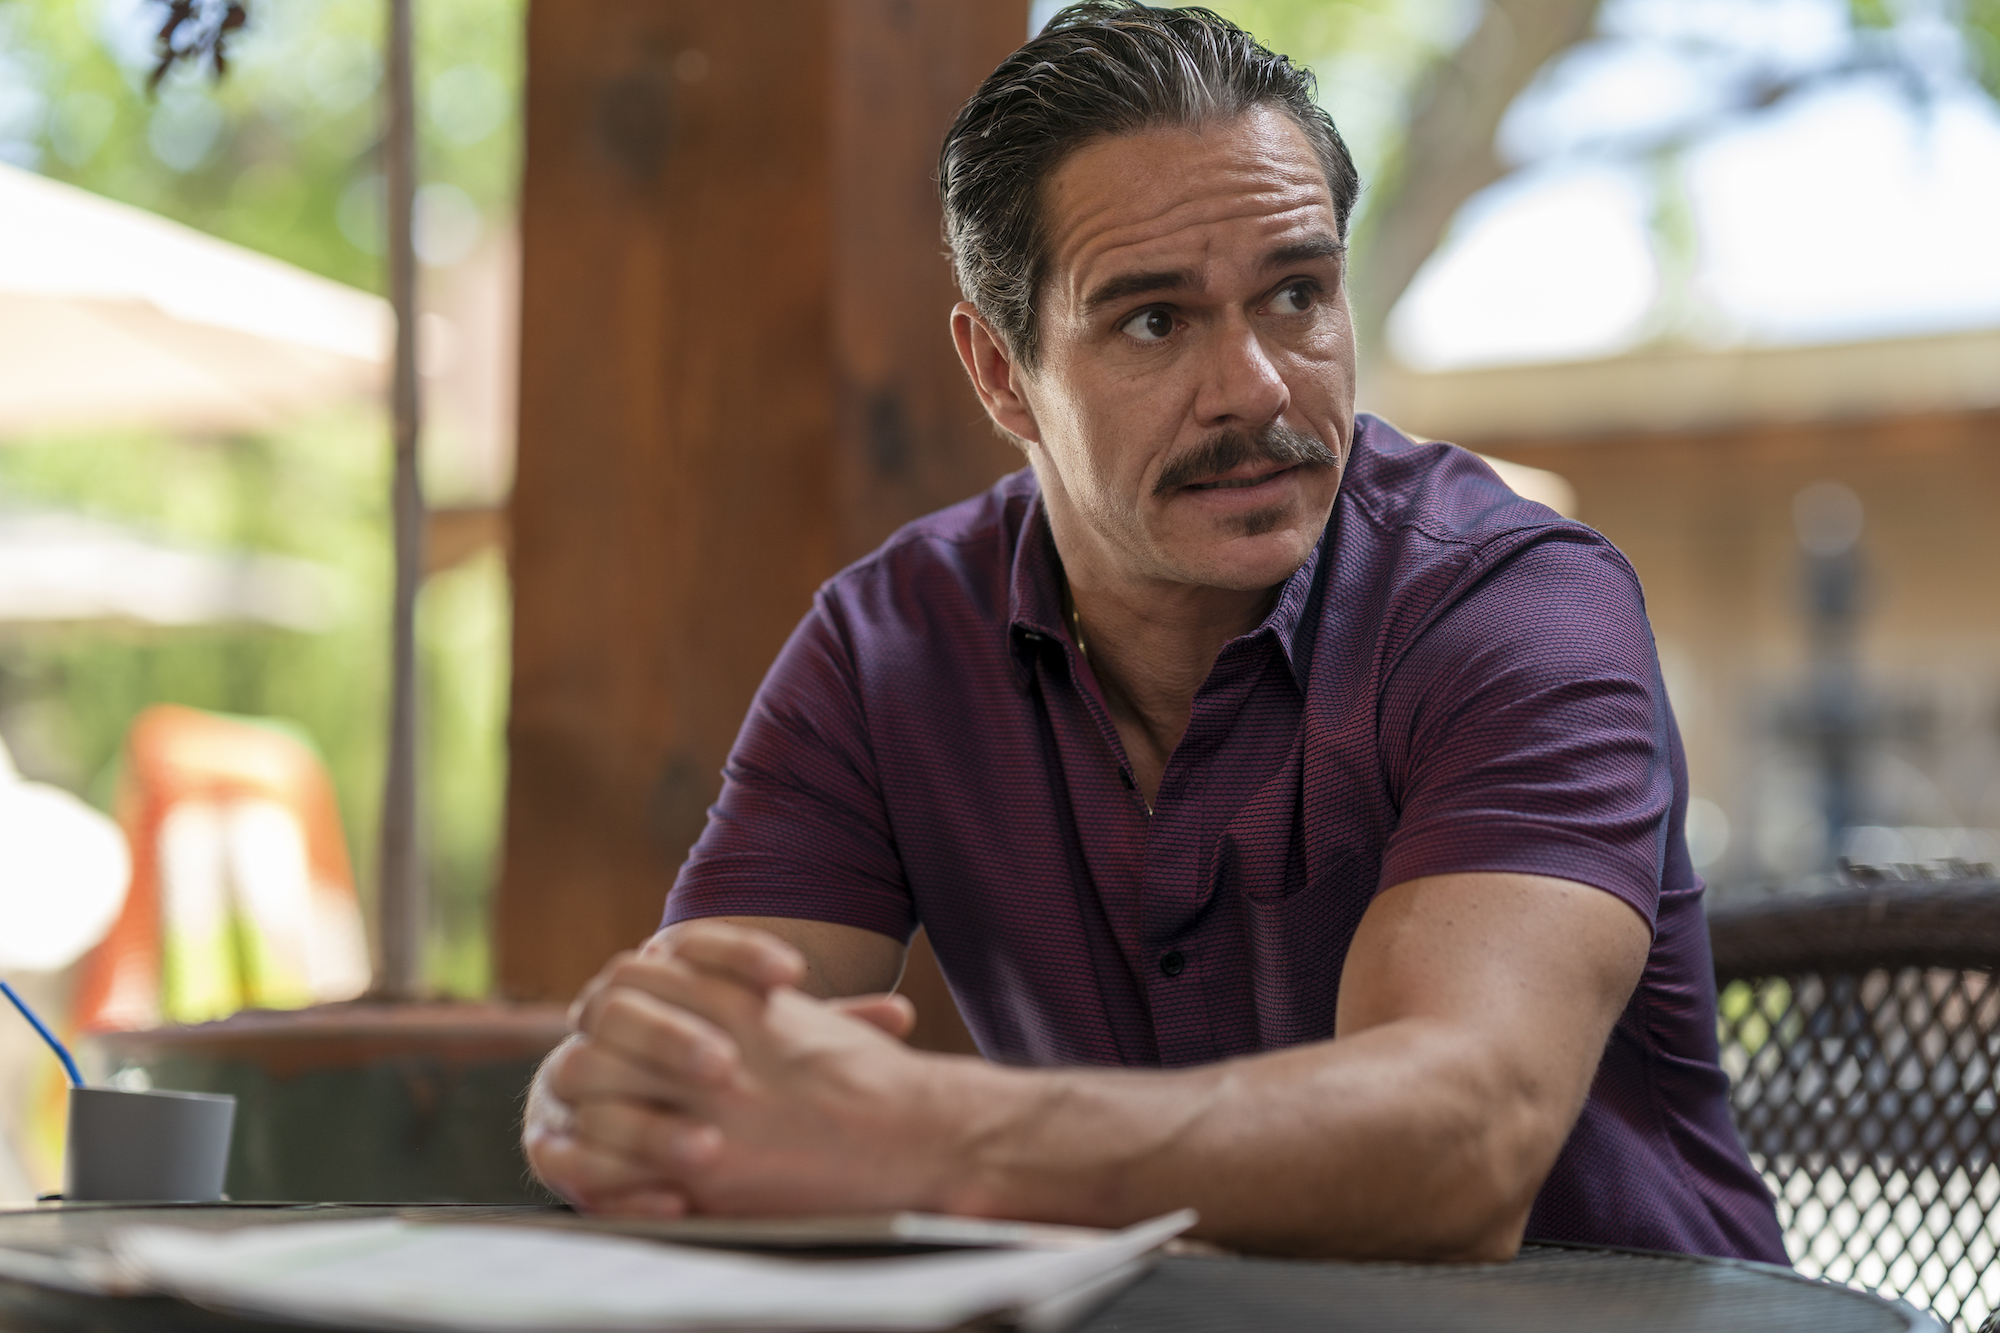 ‘Better Call Saul’ actor Tony Dalton as Lalo Salamanca with a mustache seated and wearing a purple shirt.
